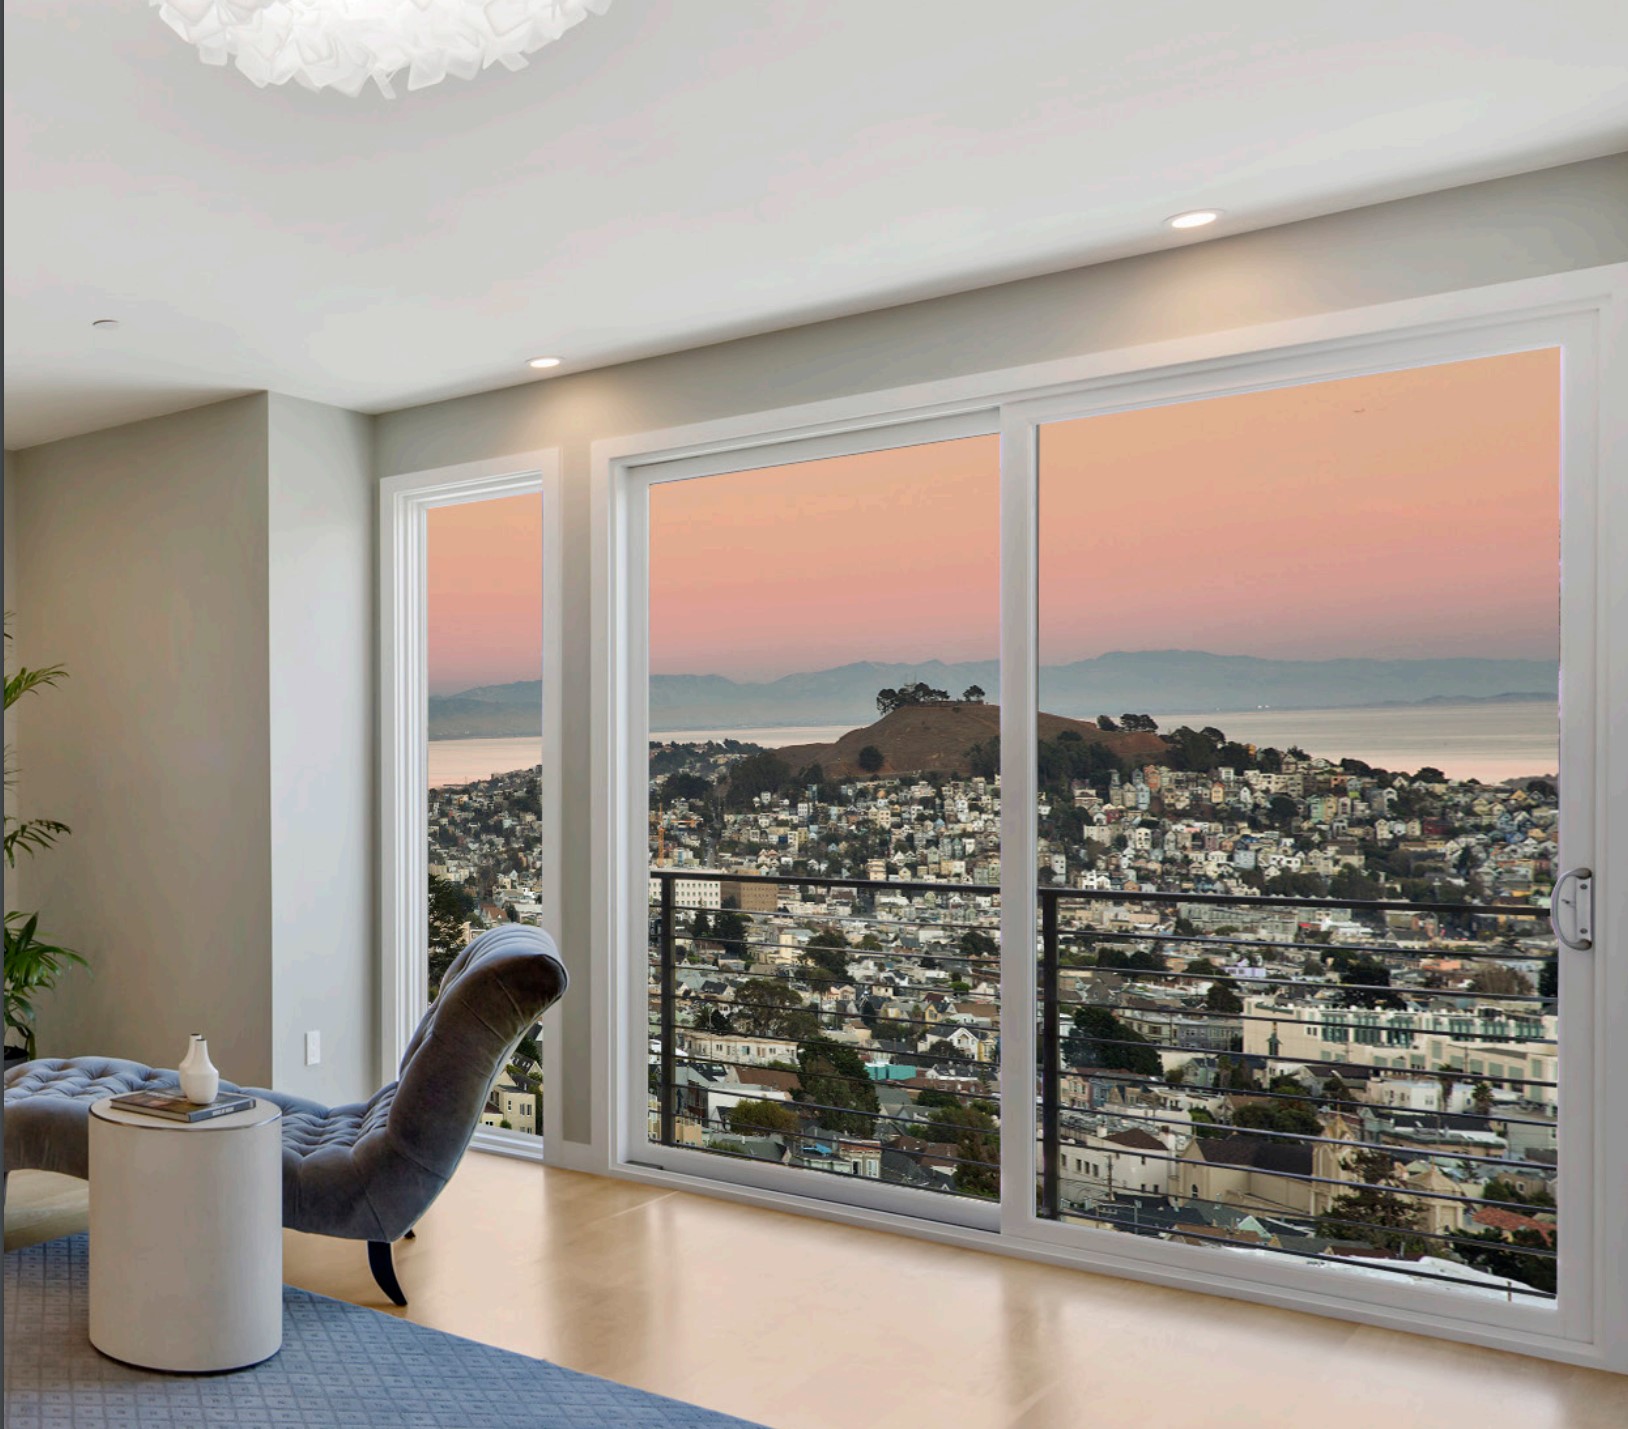 Large set of wall-size white-framed windows with view of a city at sunset.